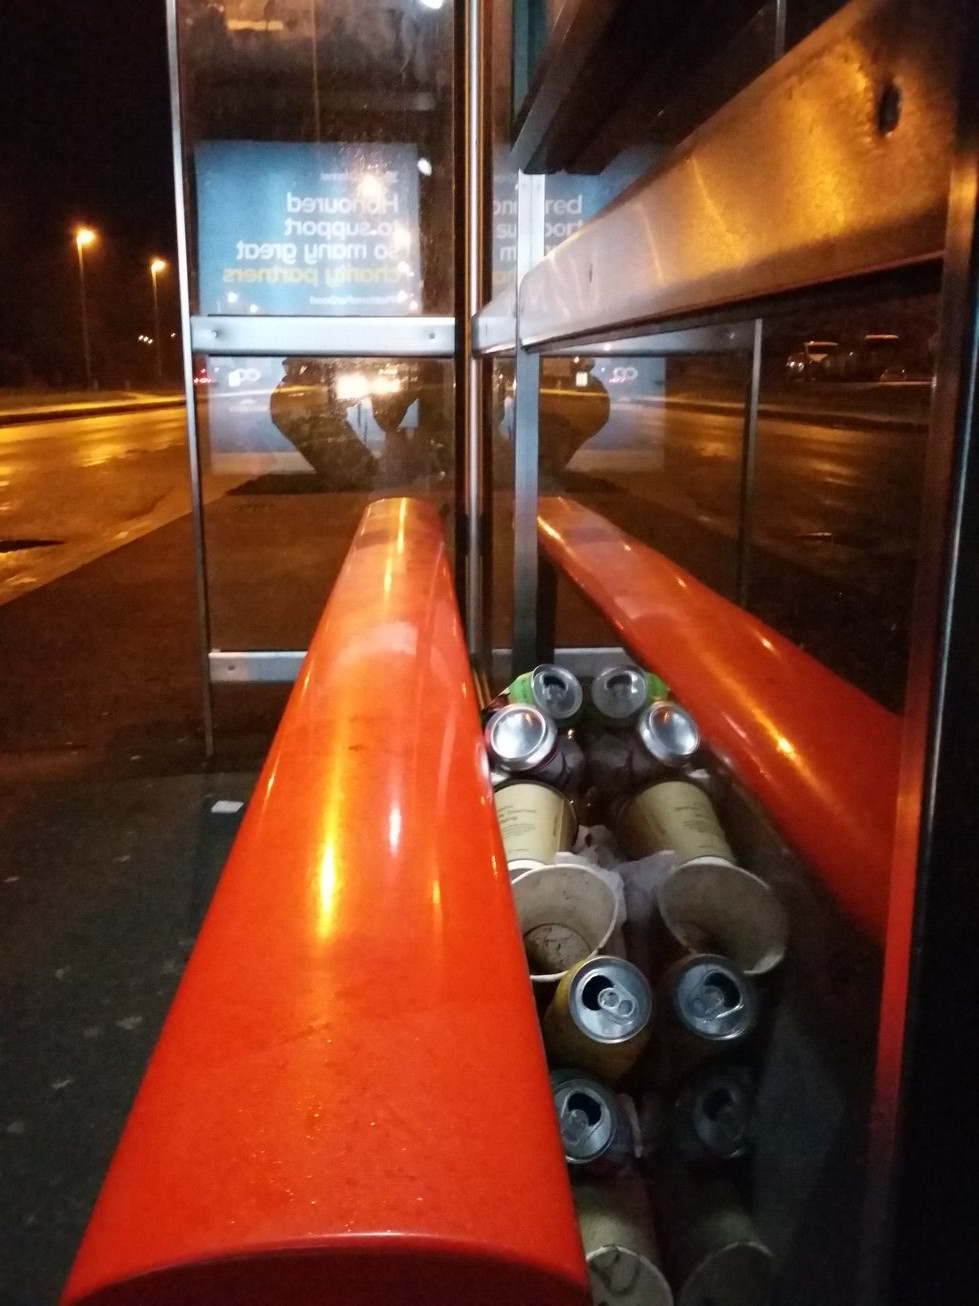 Drinks cans stuffed down the back of a bus stop seat